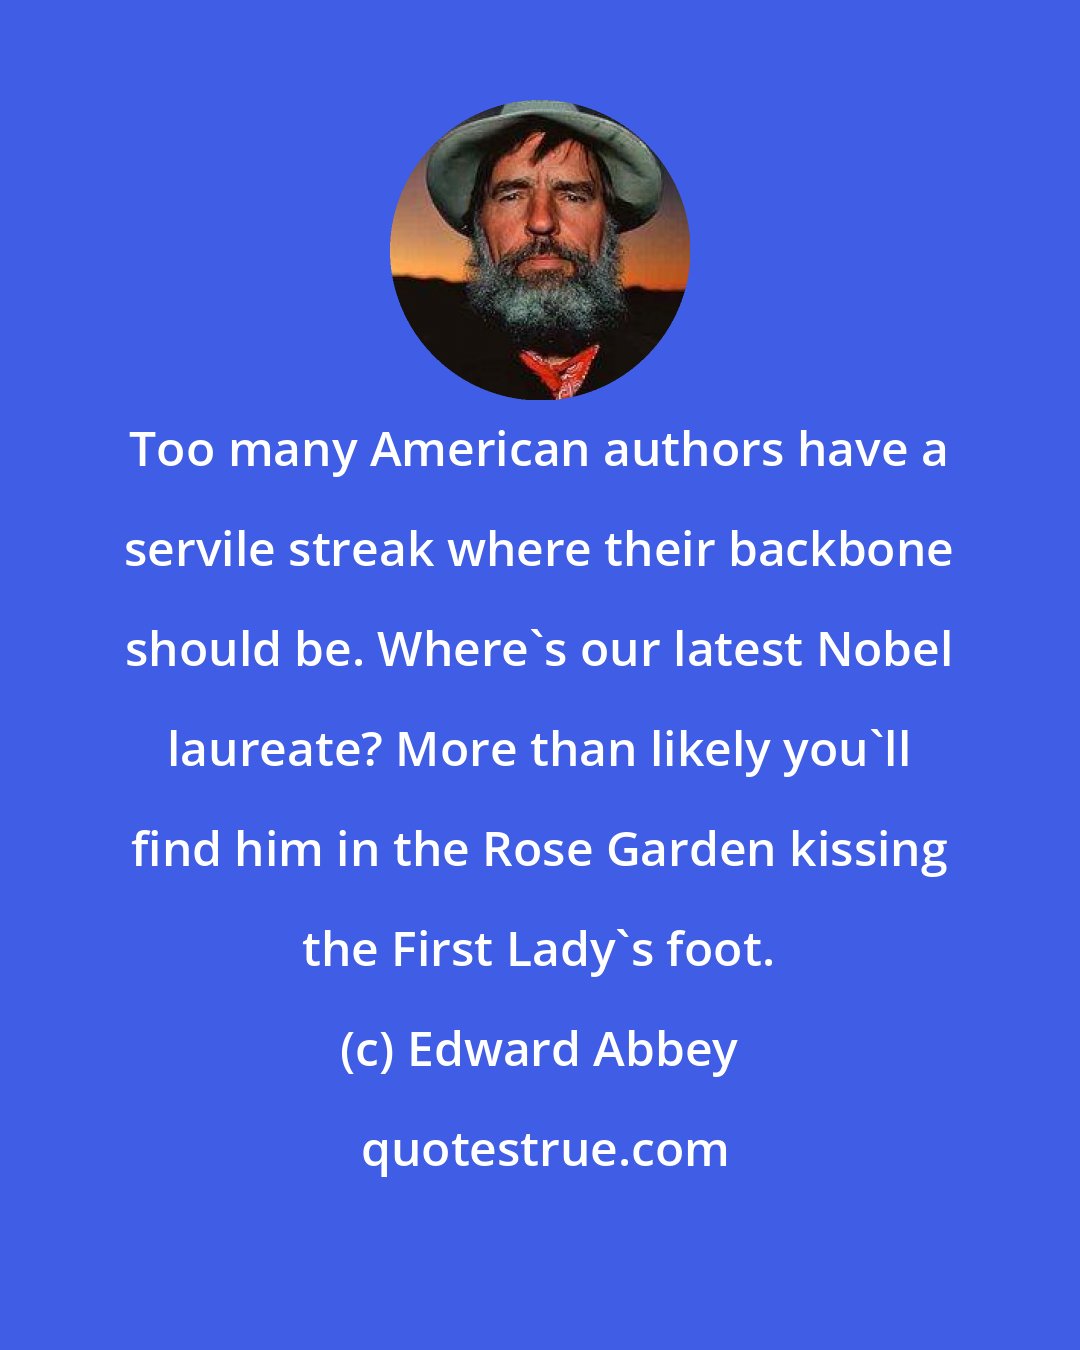 Edward Abbey: Too many American authors have a servile streak where their backbone should be. Where's our latest Nobel laureate? More than likely you'll find him in the Rose Garden kissing the First Lady's foot.